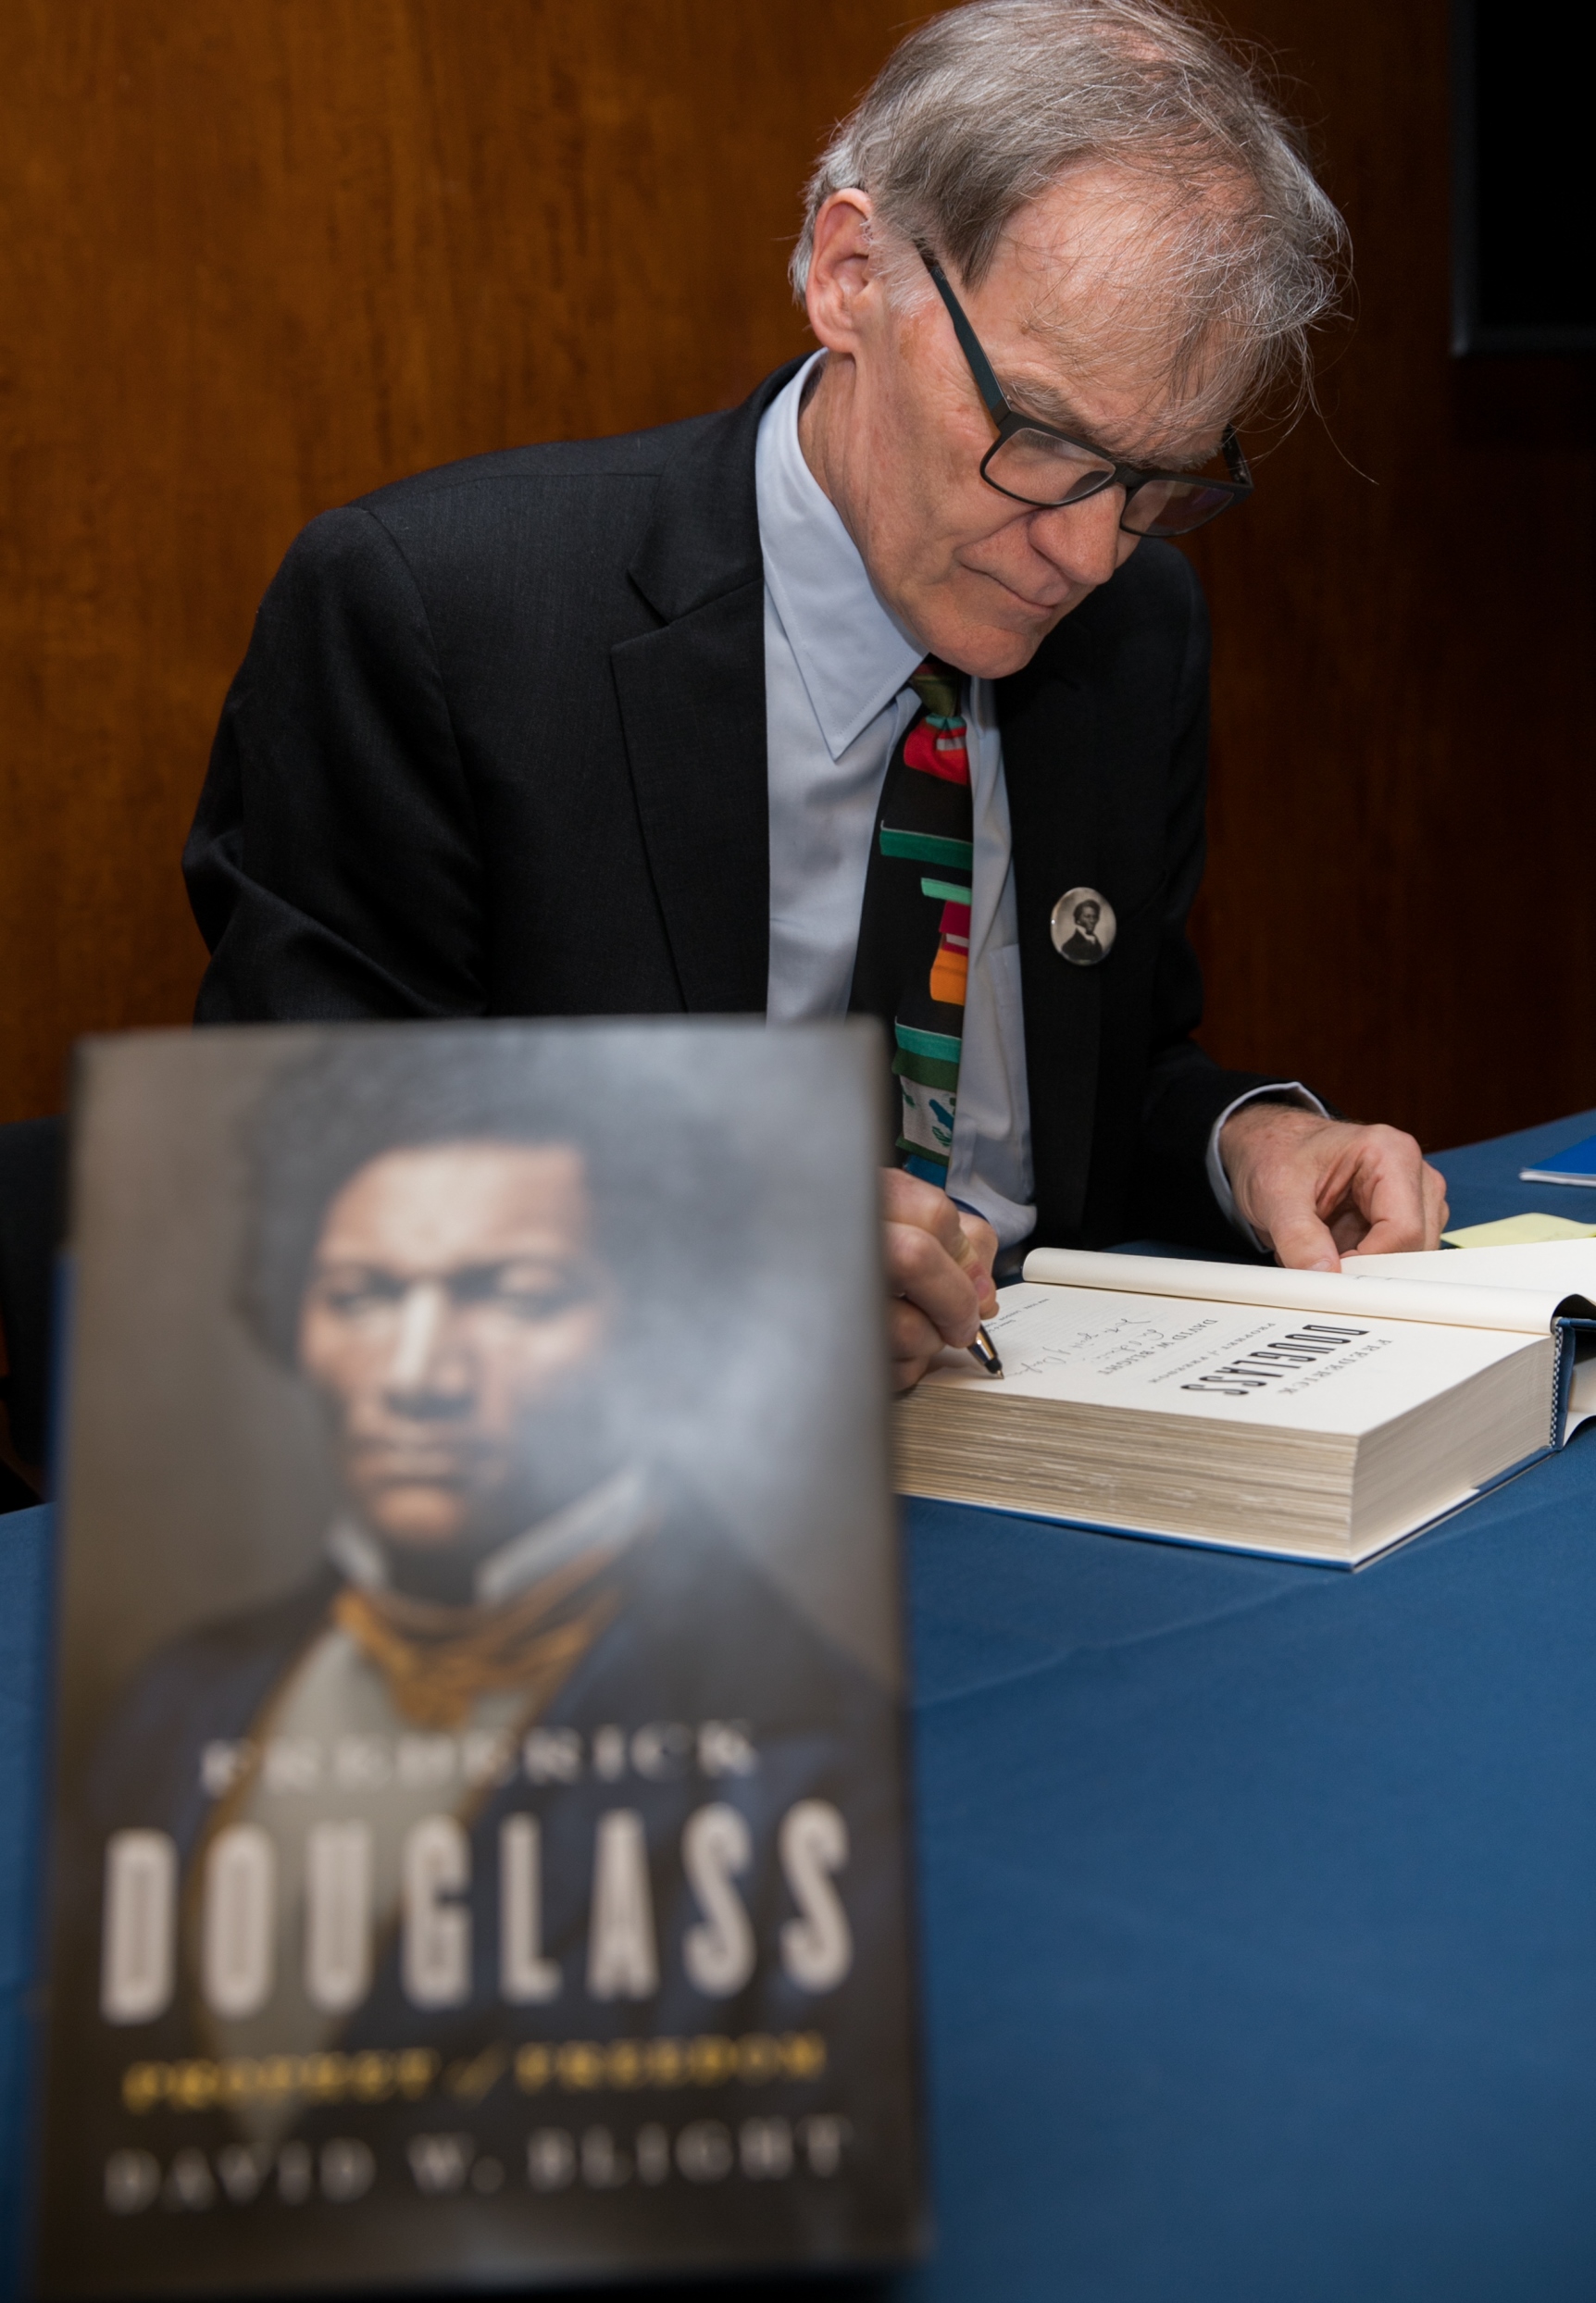 David Blight signing his book at the Lincoln Prize Ceremony in 2019